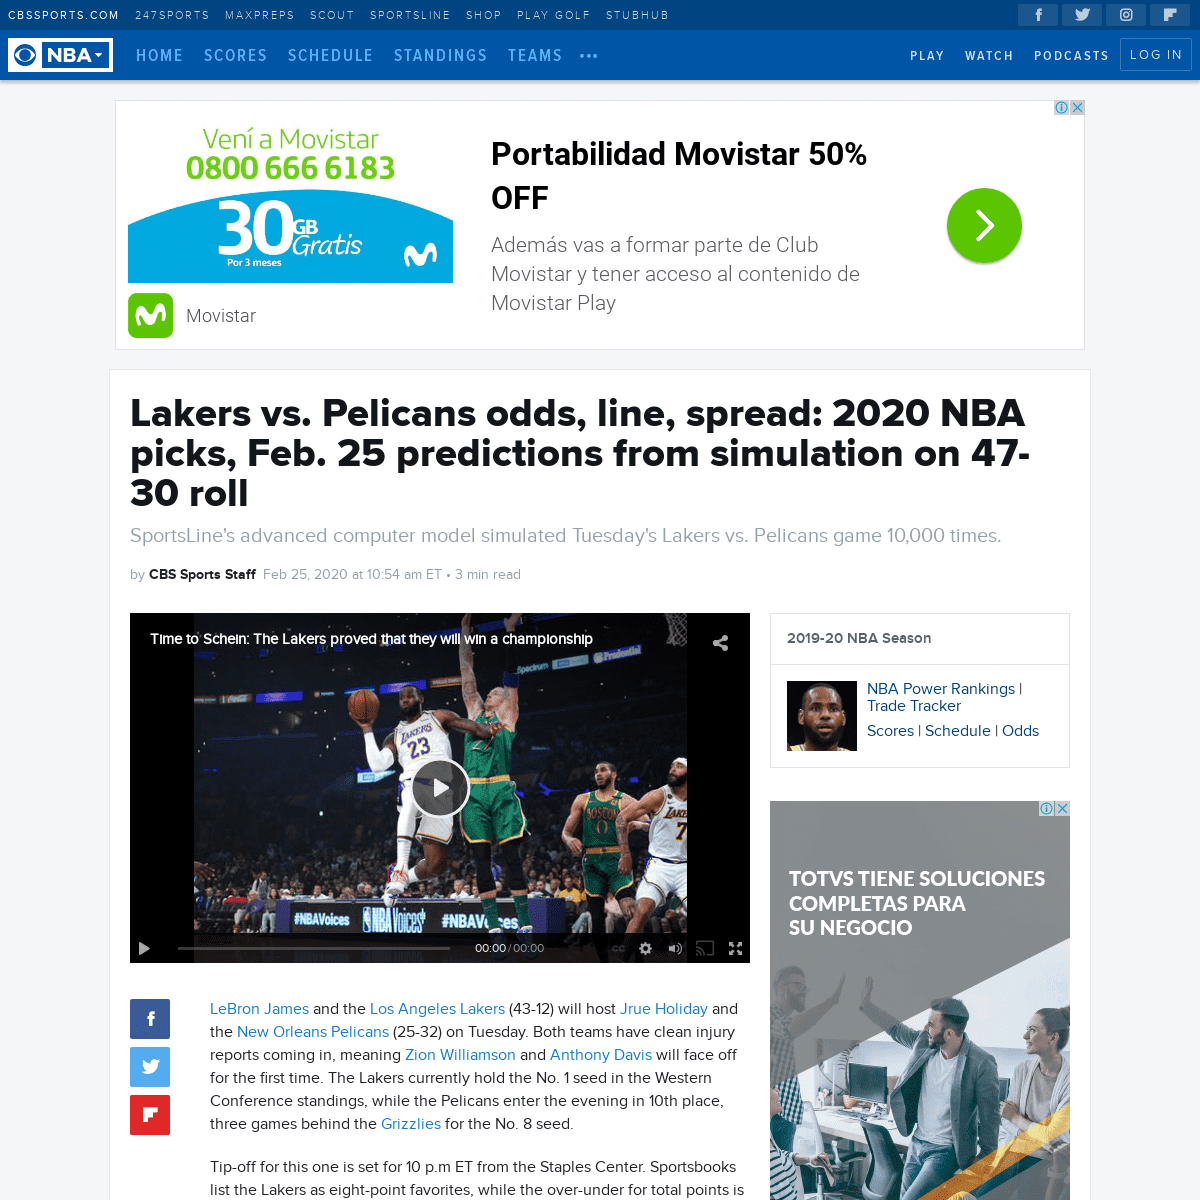 A complete backup of www.cbssports.com/nba/news/lakers-vs-pelicans-odds-line-spread-2020-nba-picks-feb-25-predictions-from-simul